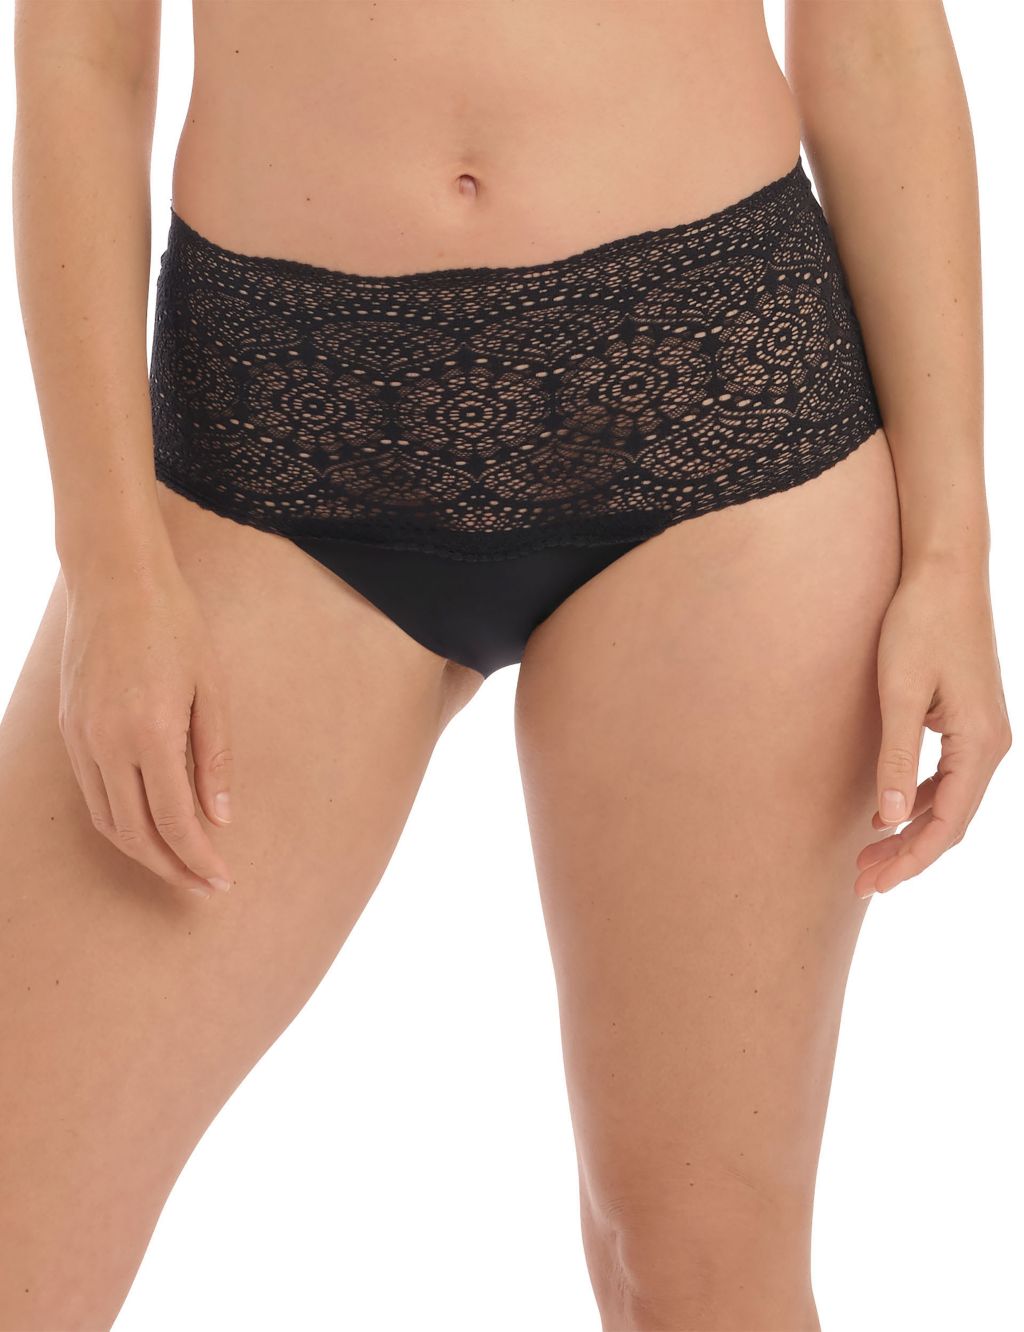 Lace Ease High Waisted Full Briefs, Fantasie